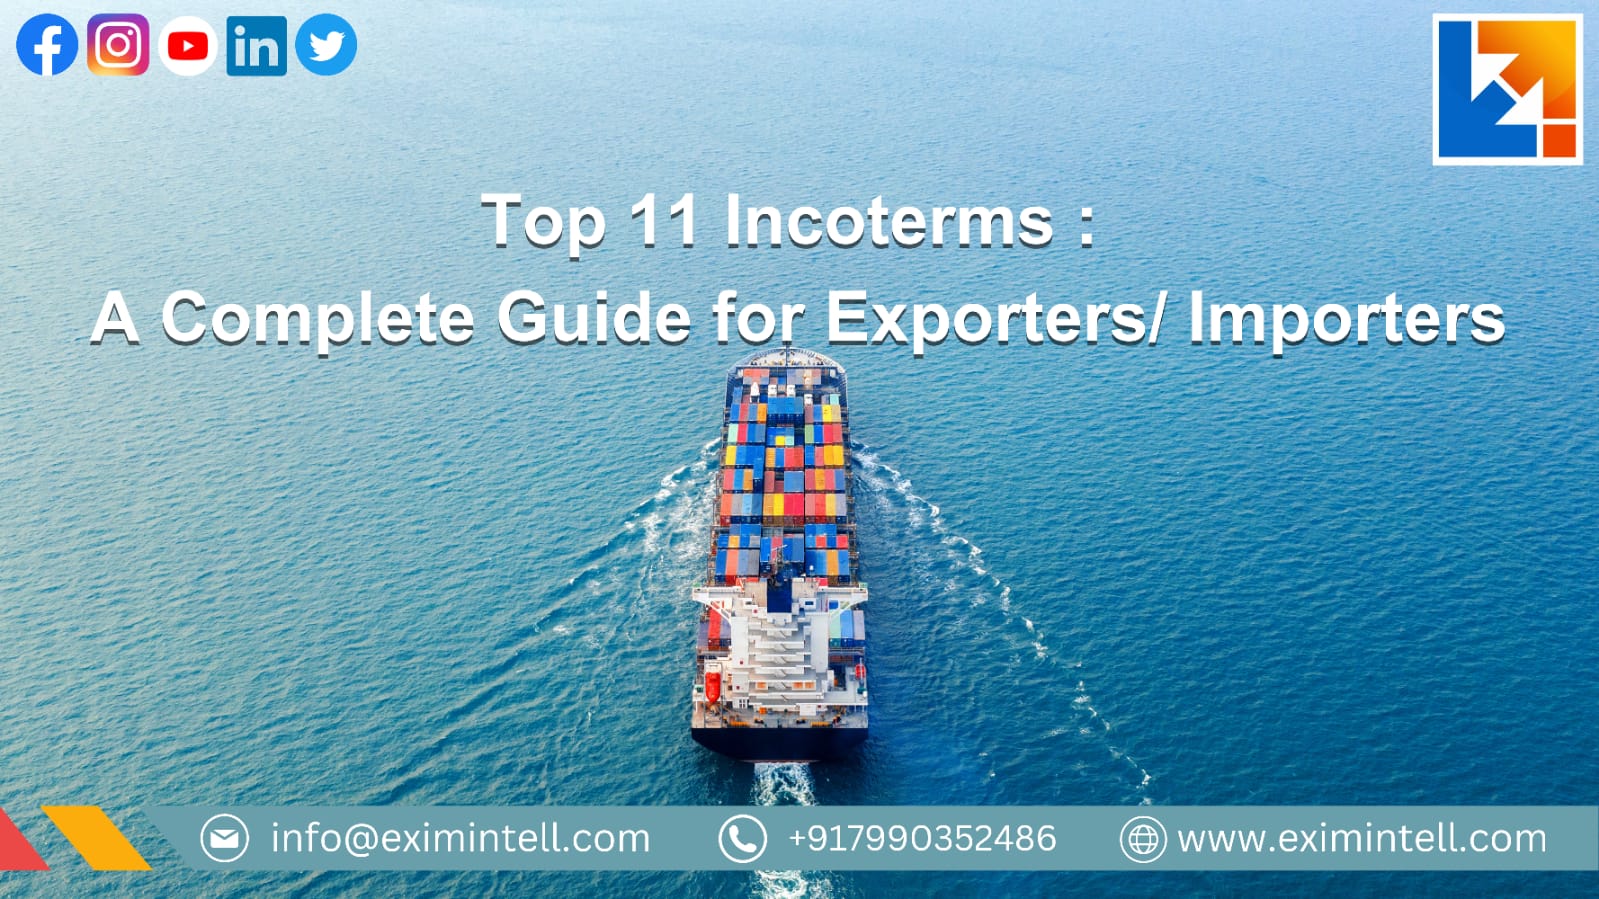 Top 11 Incoterms : A Complete Guide for Exporters/Importers